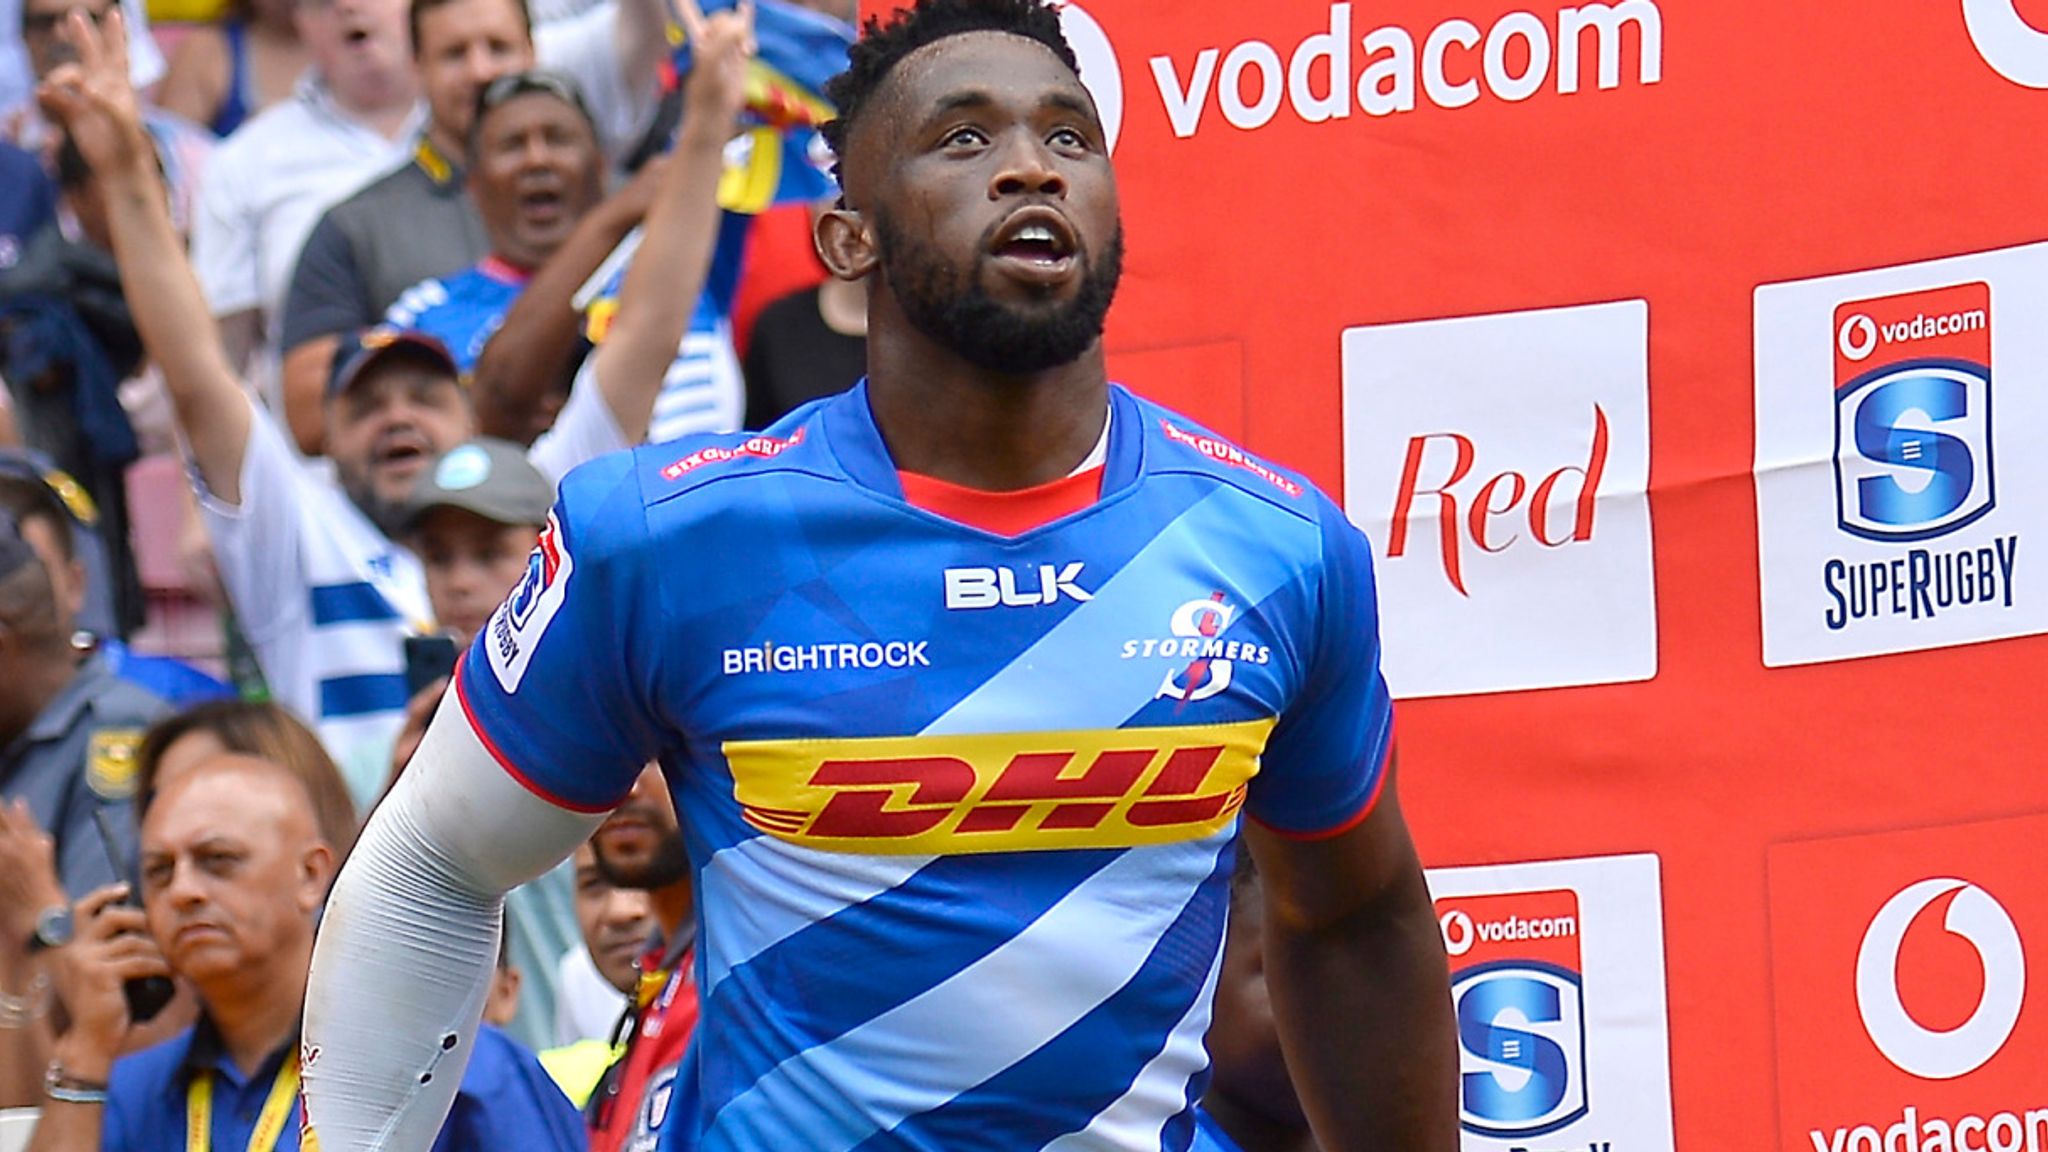 Stormers South Africa Super 12 Rugby Jersey Shirt